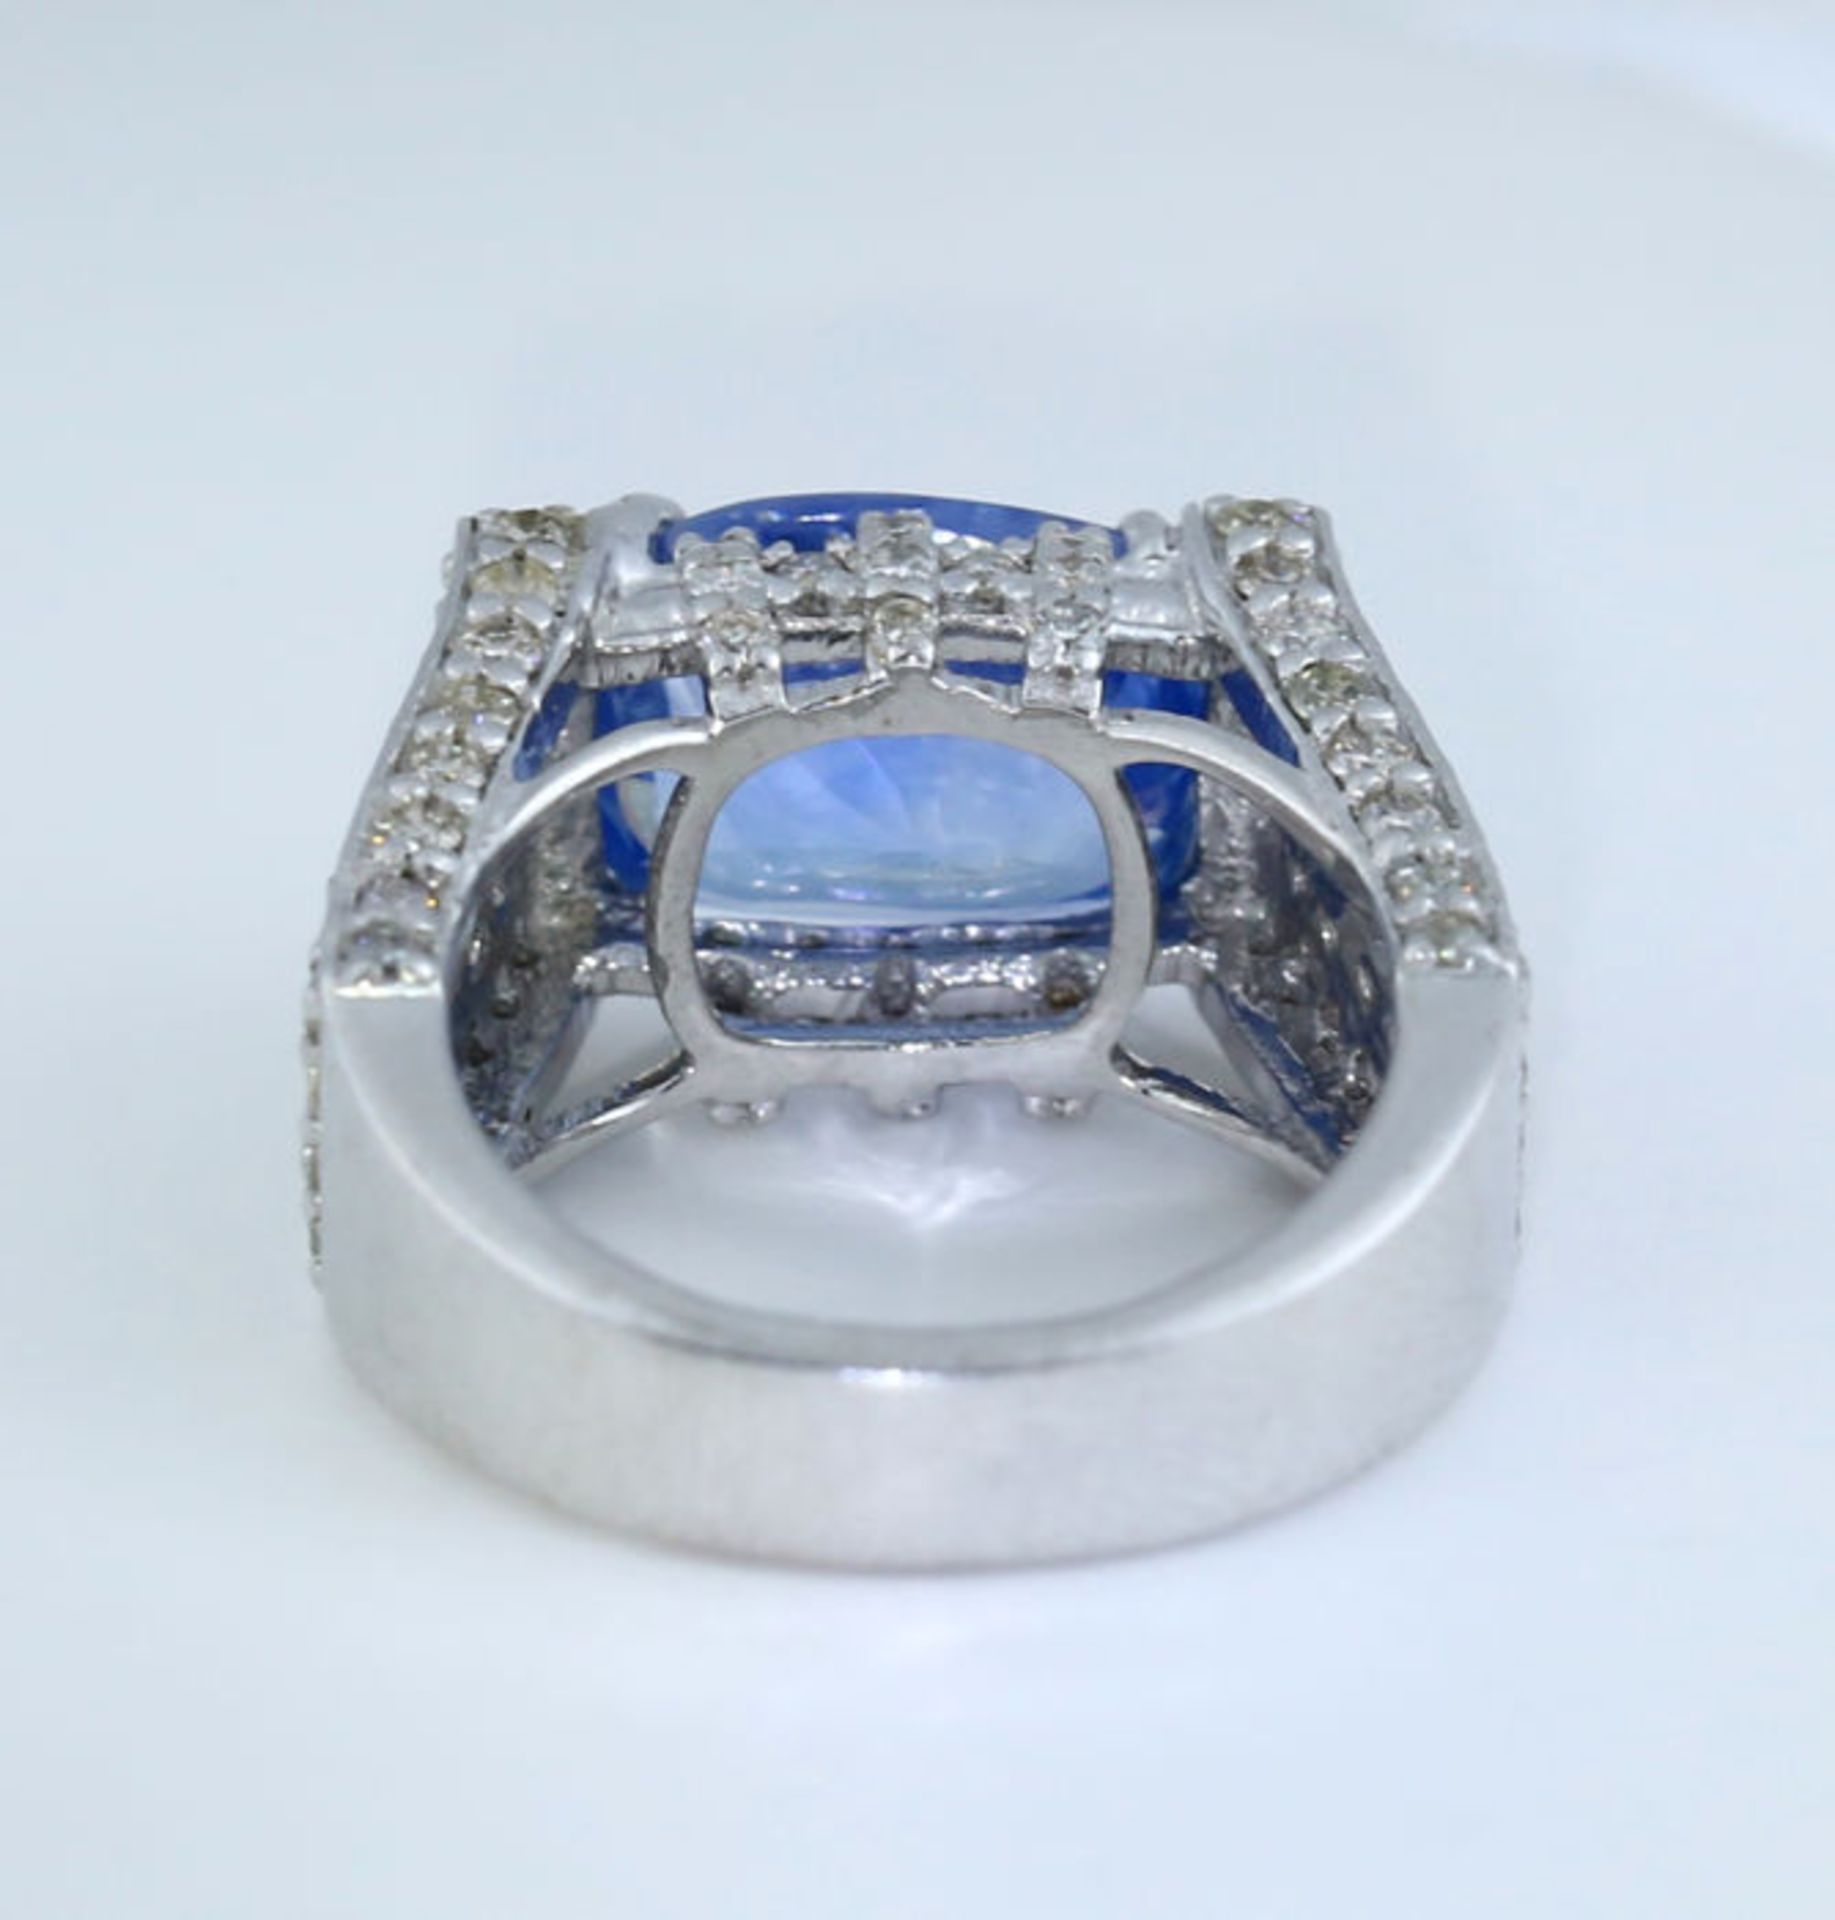 14 K / 585 White Gold Very Exclusive Designer Blue Sapphire (IGI certified) and Diamond Ring - Image 8 of 8